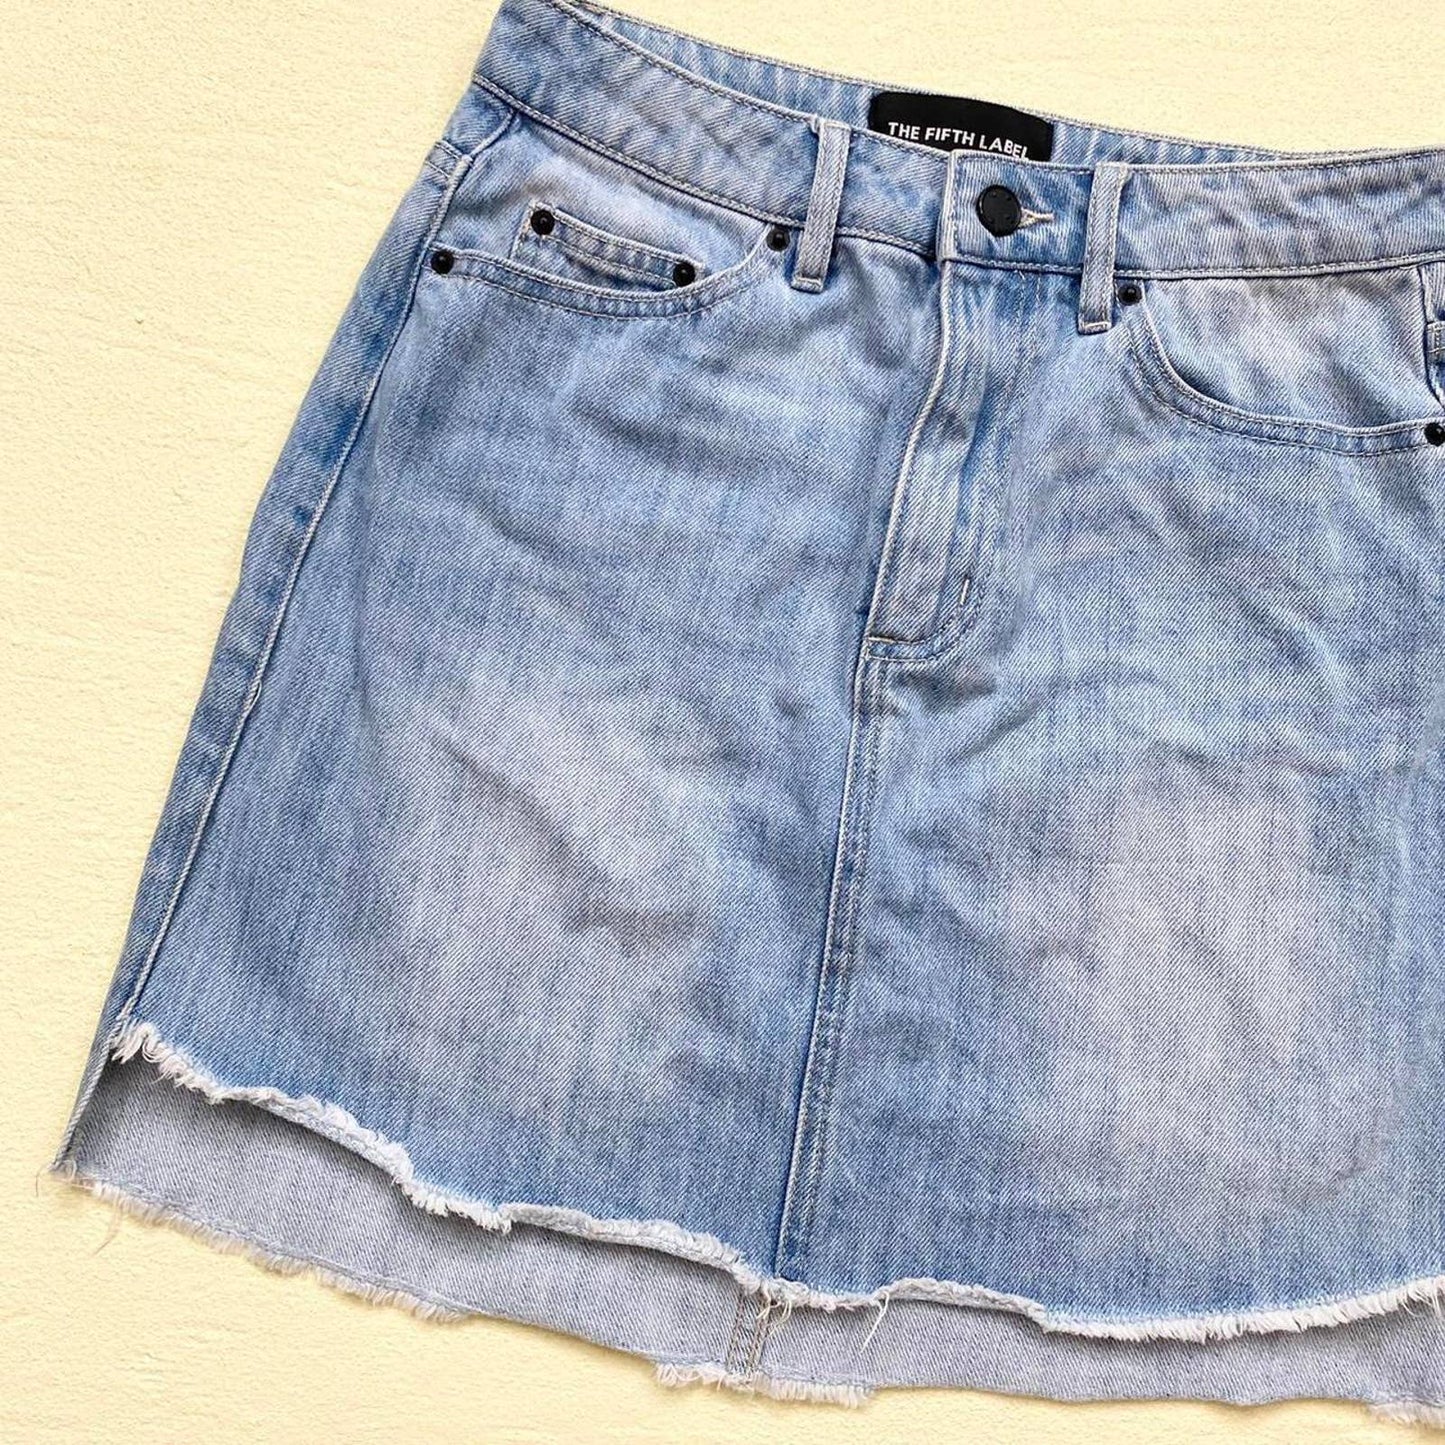 Secondhand The Fifth Label High Waisted Denim Mini Skirt, Size 25”